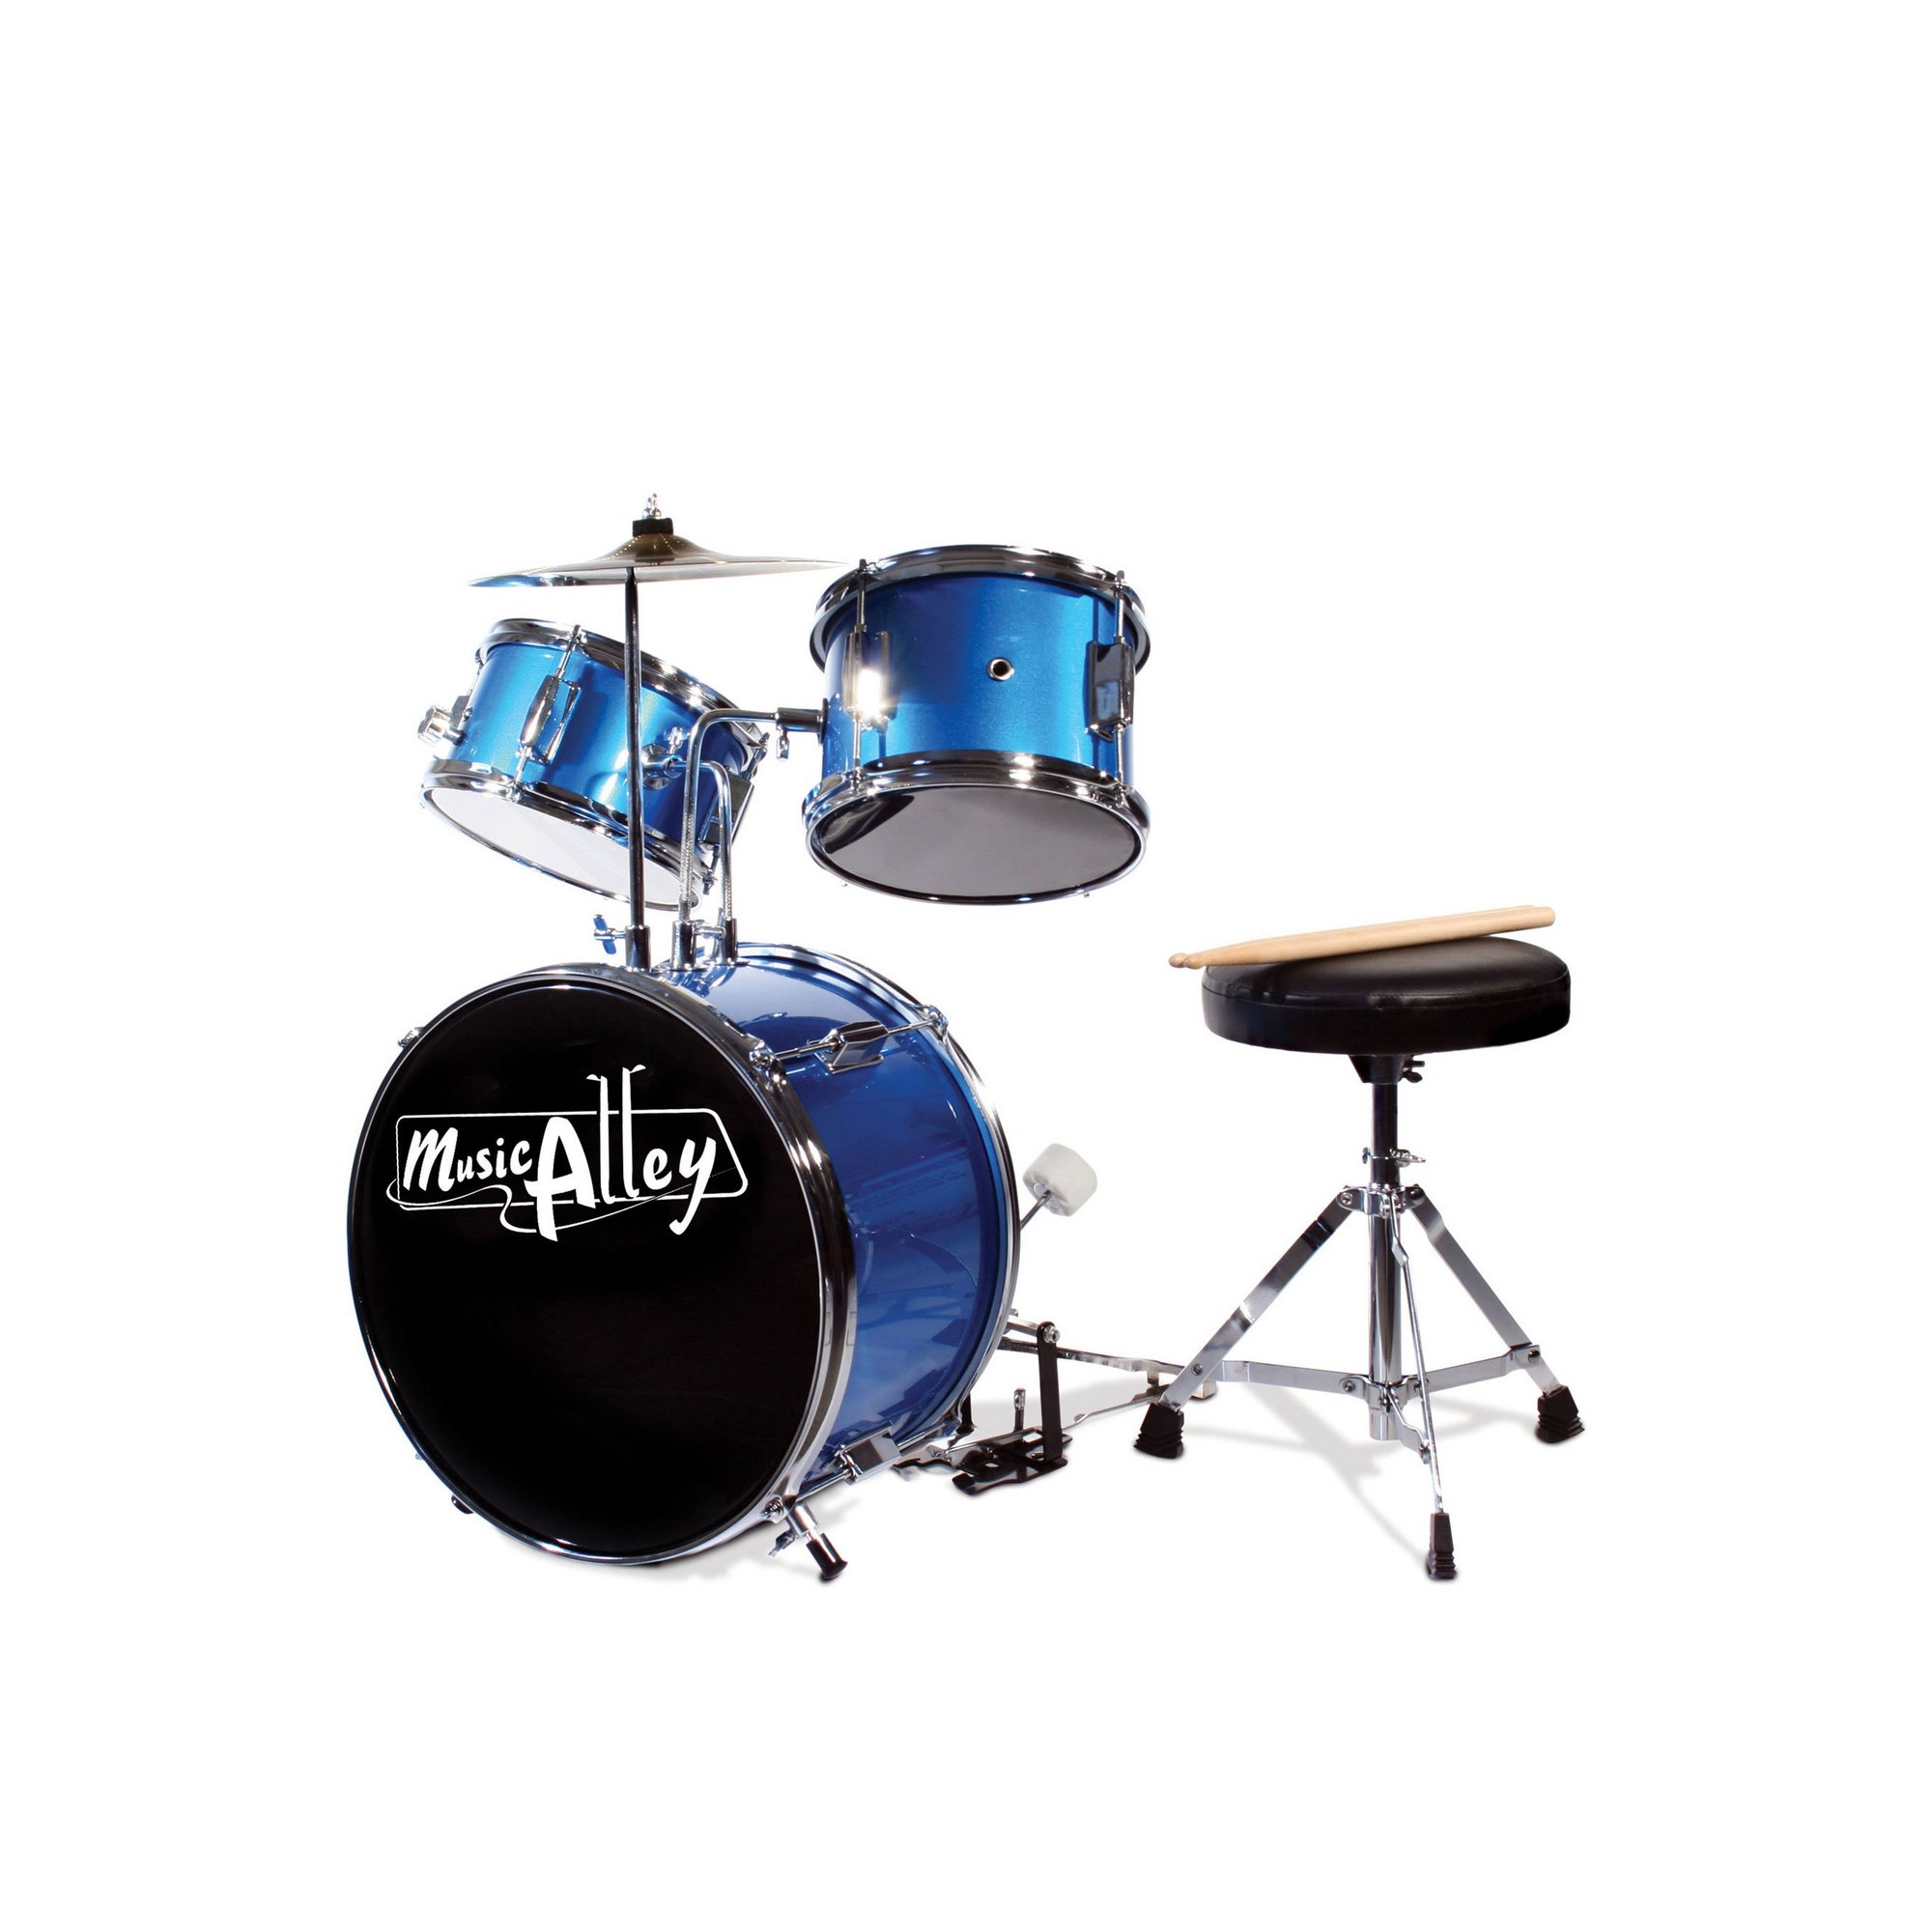 Music Alley Music Alley Junior Drum Kit with Stool and Drum Sticks | Blue